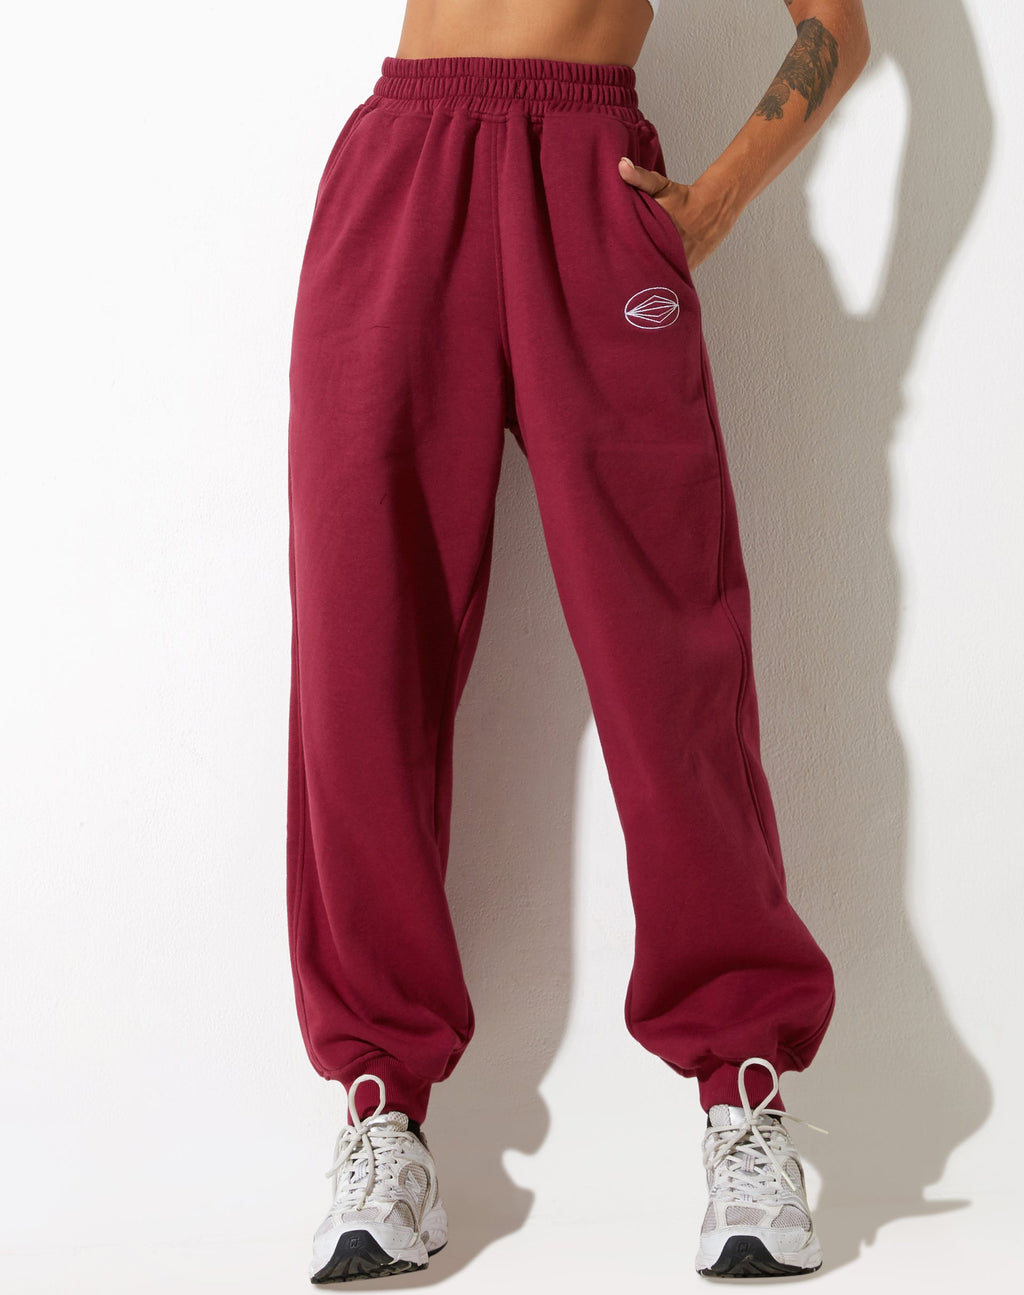 Roider Jogger in Burgundy with "Winning Team" Embro